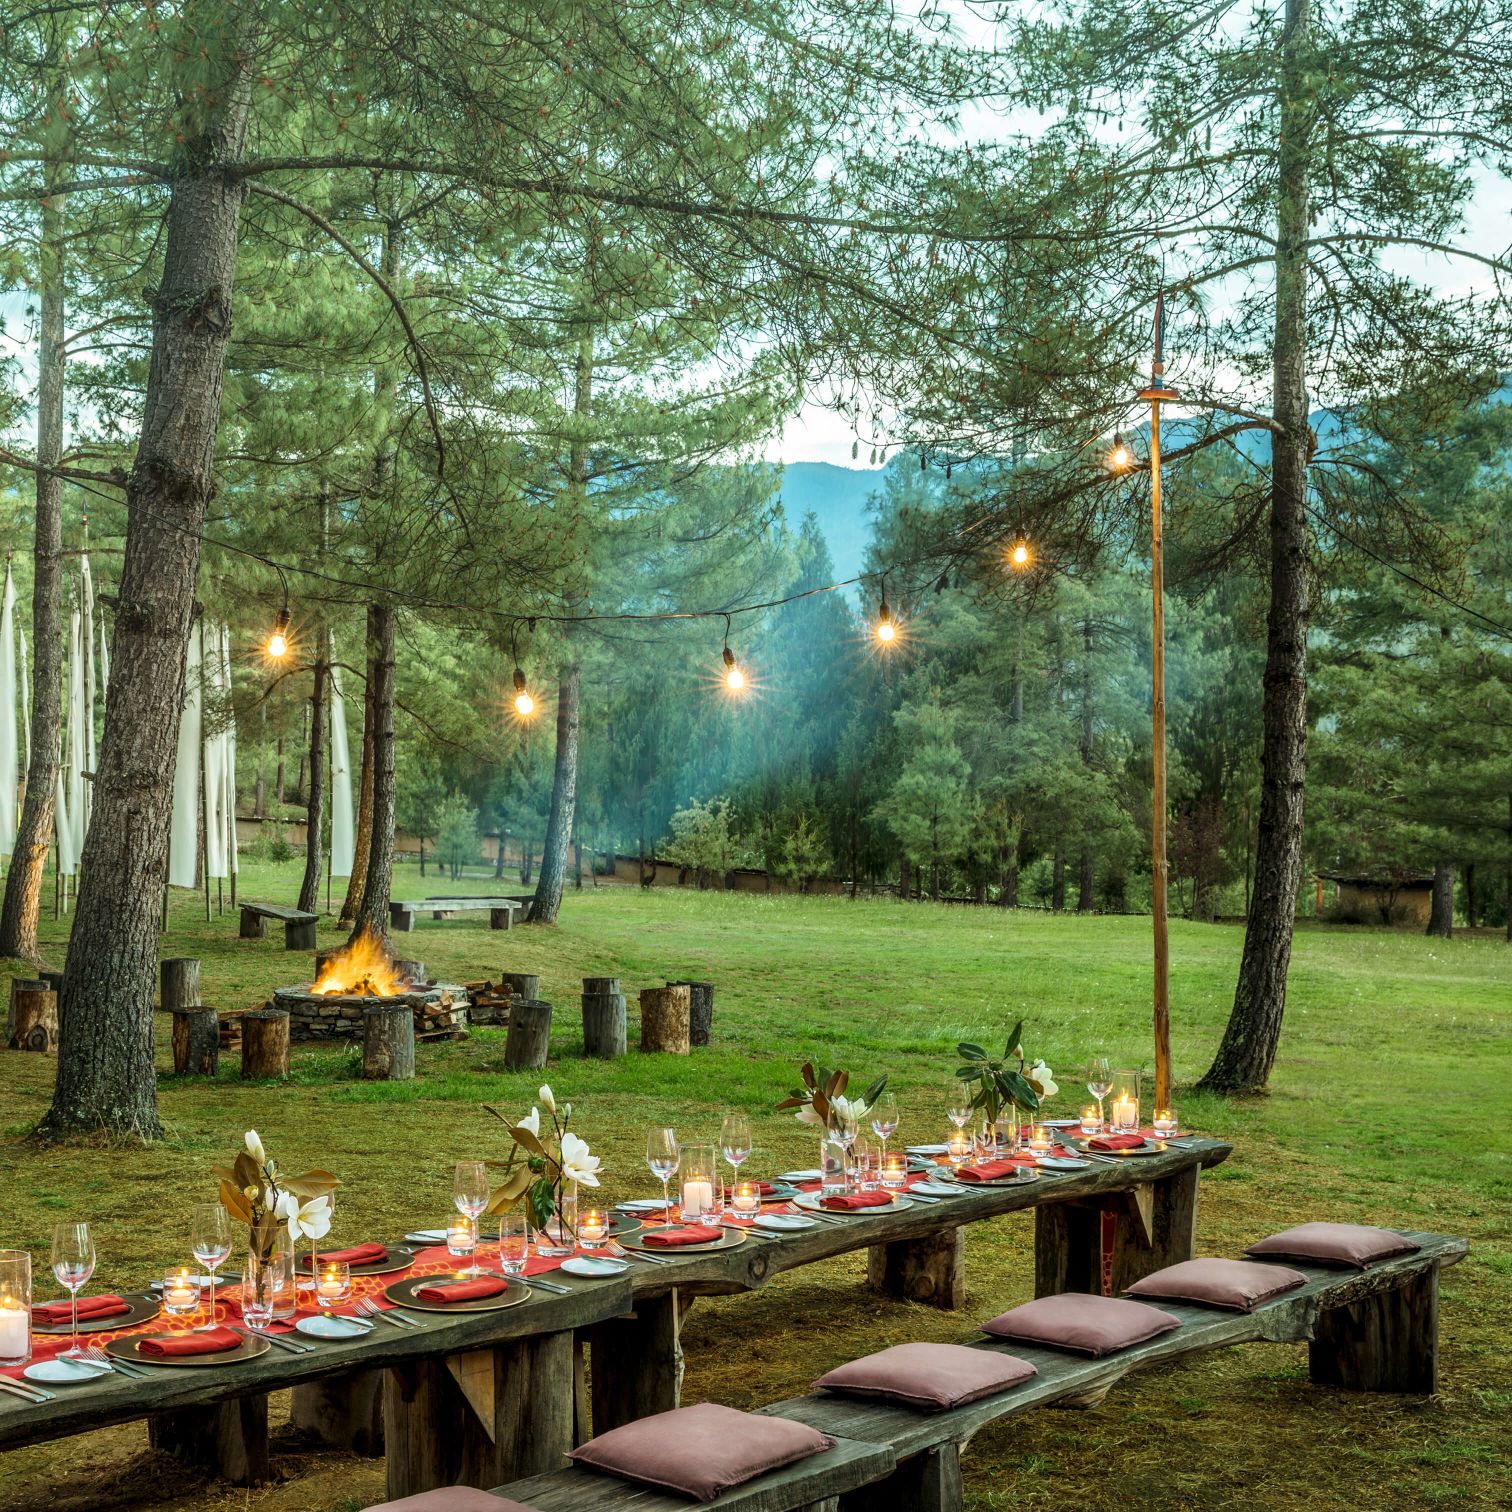 A Picnic Table With A Fire Pit And A Fire Pit With A Fire And Trees In The Background